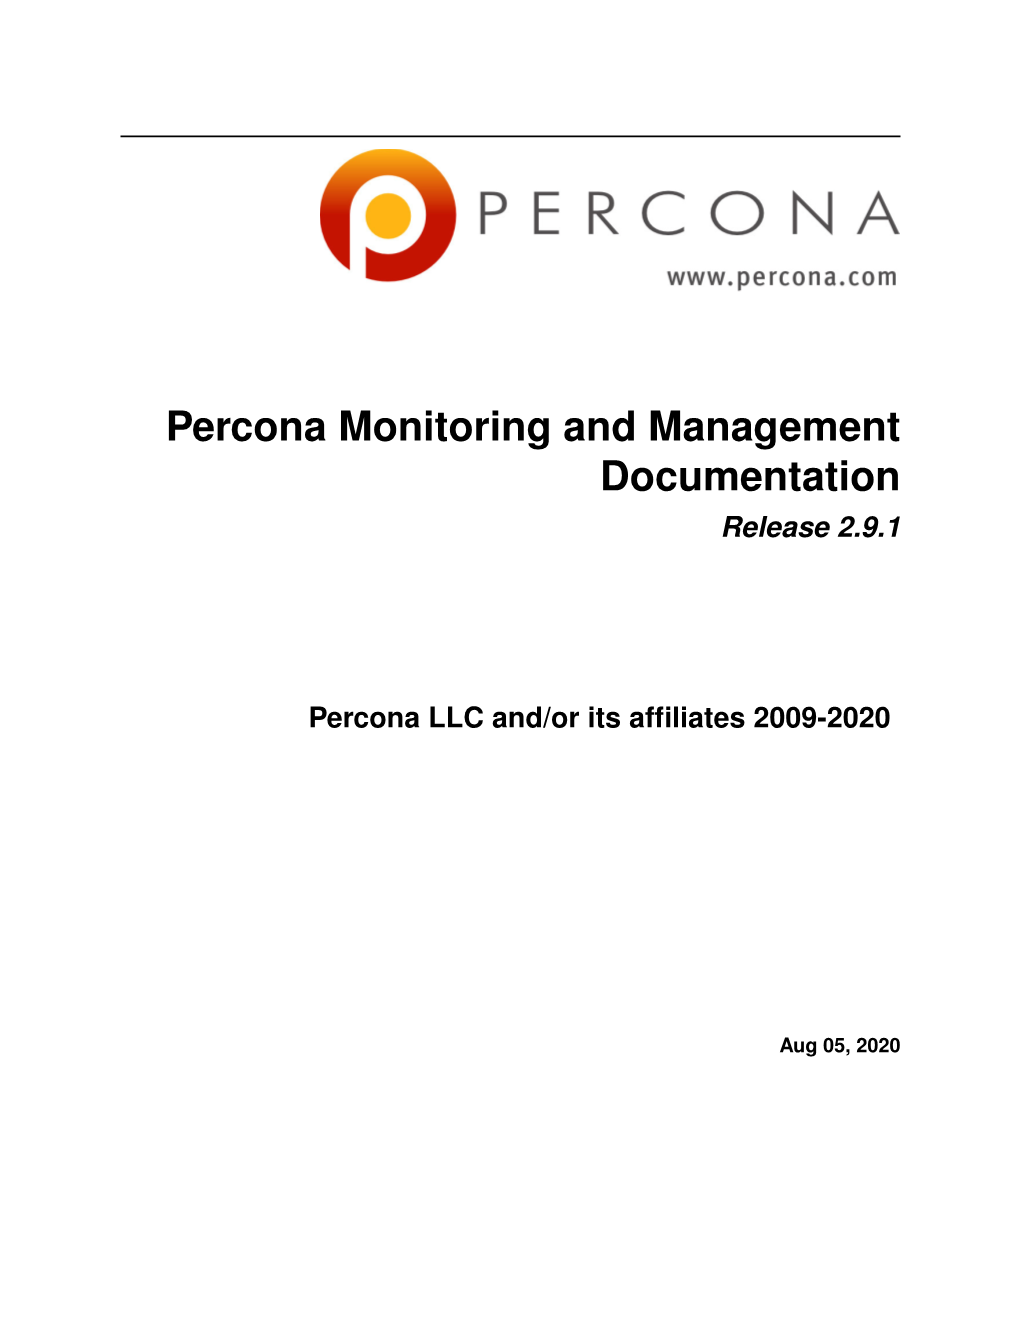 Percona Monitoring and Management Documentation Release 2.9.1